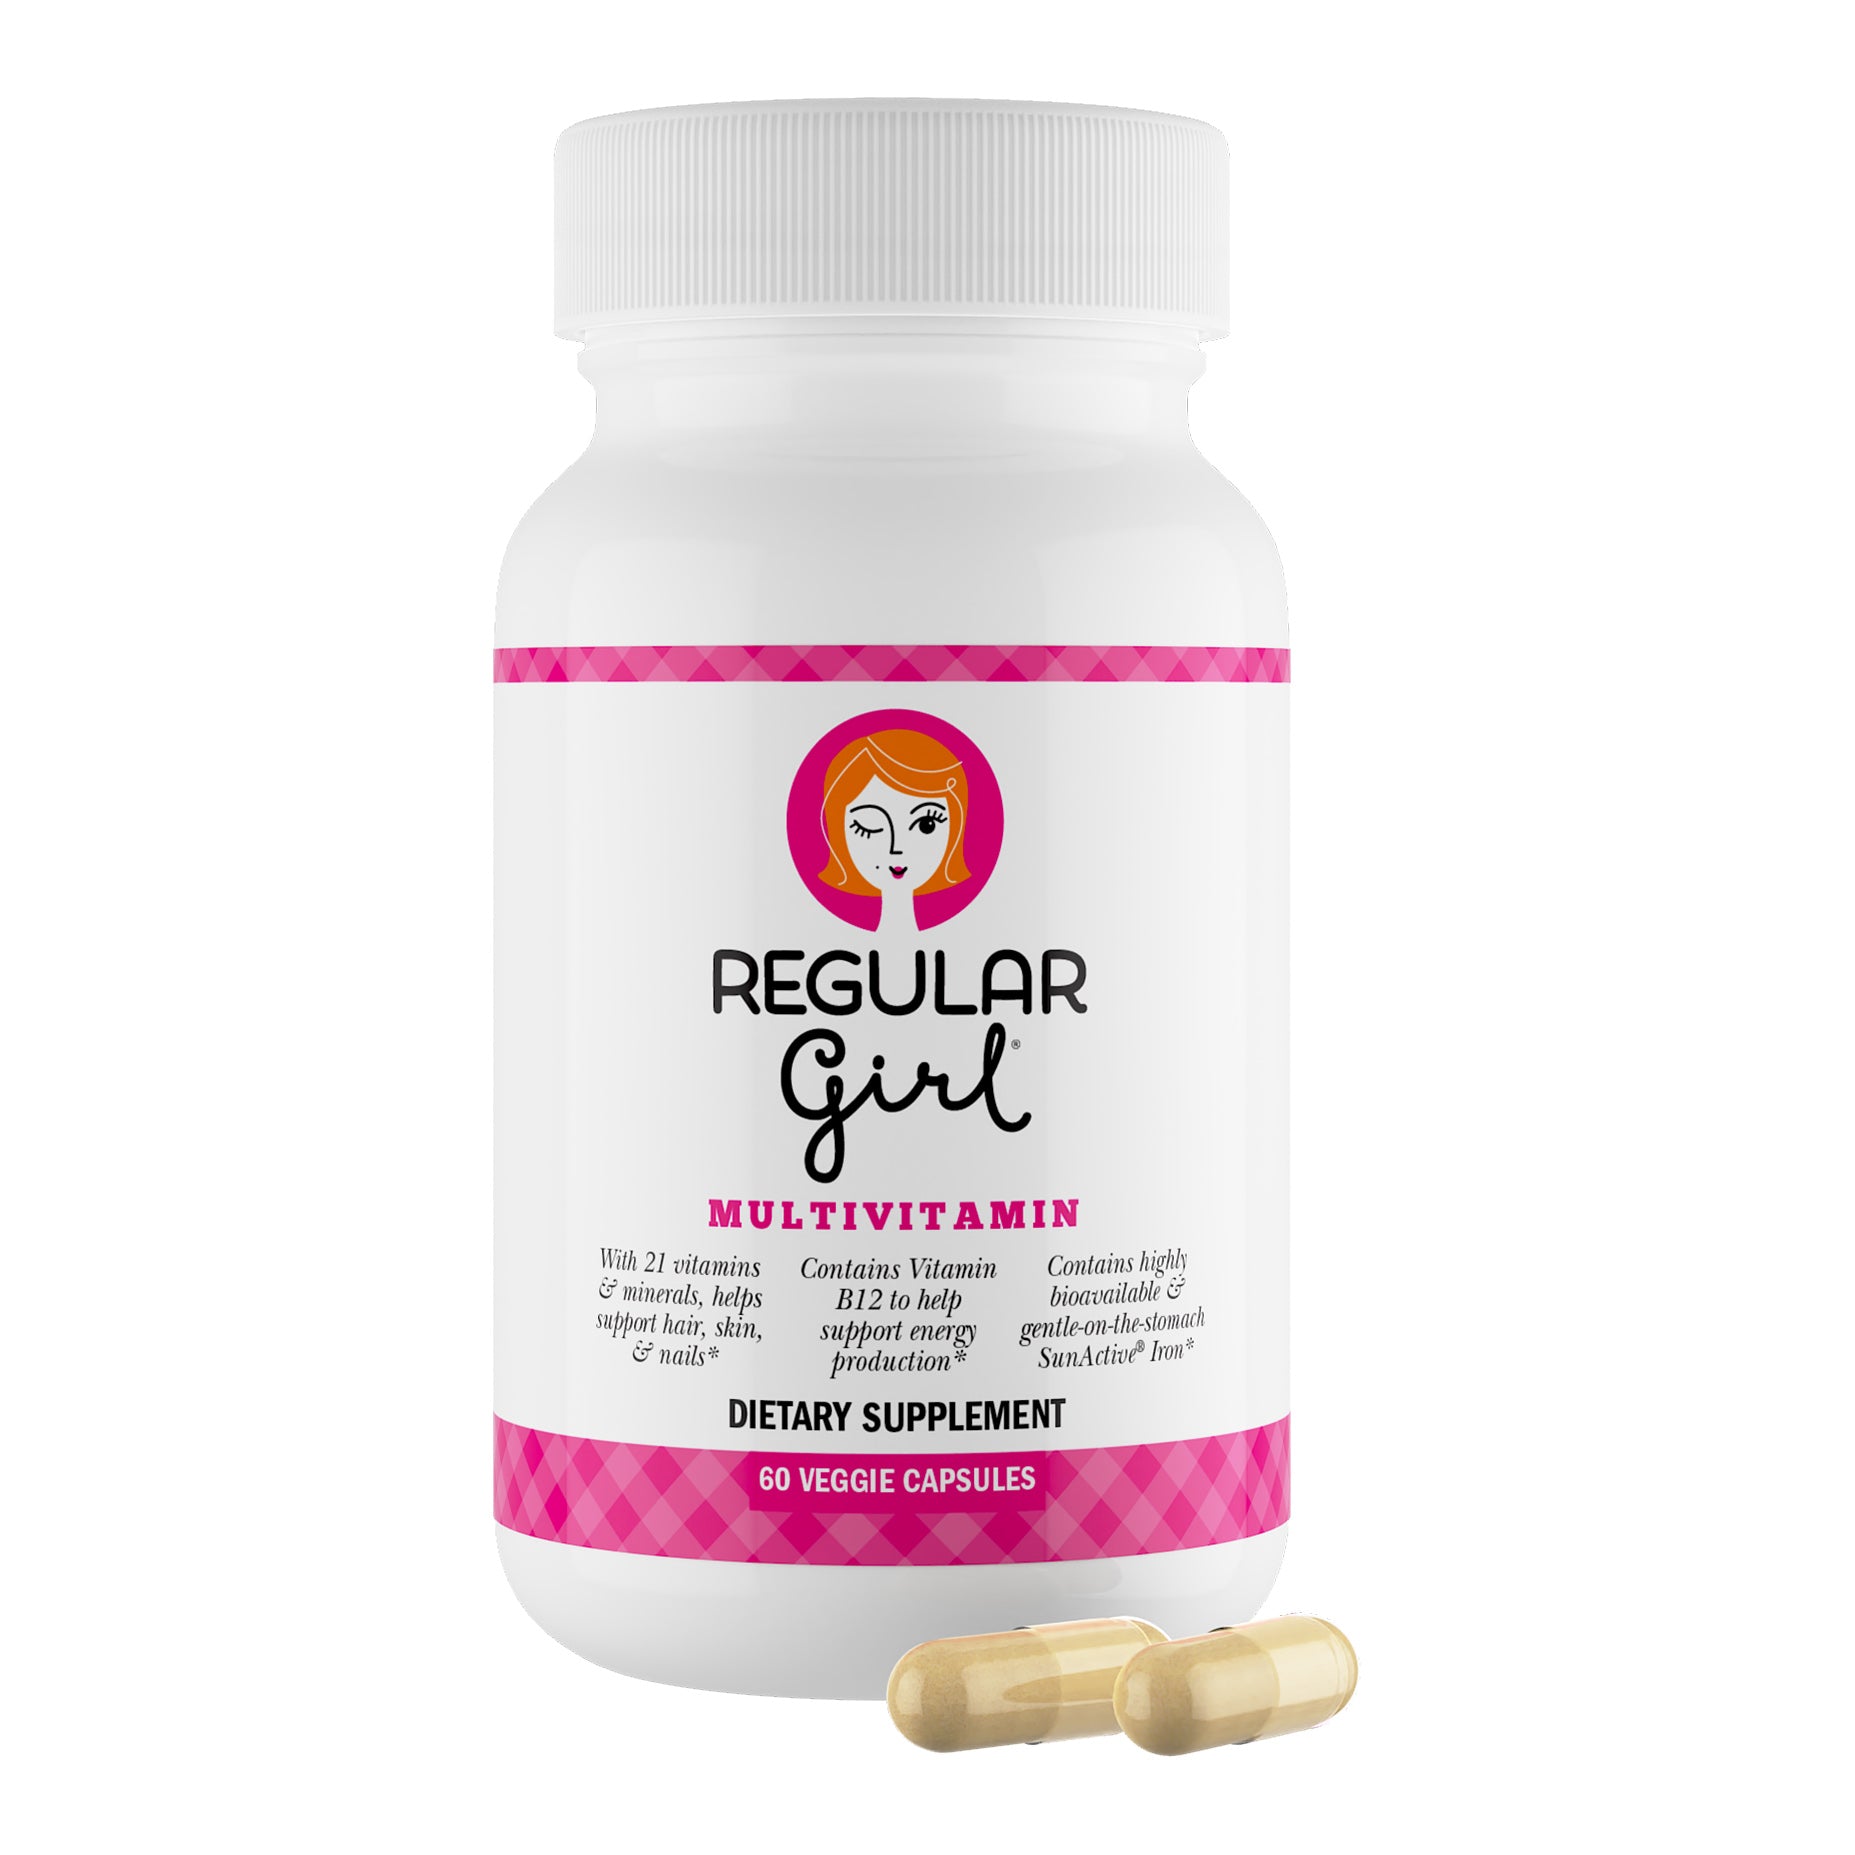 Regular Girl Multi Vitamin Bottle Front View with two capsules